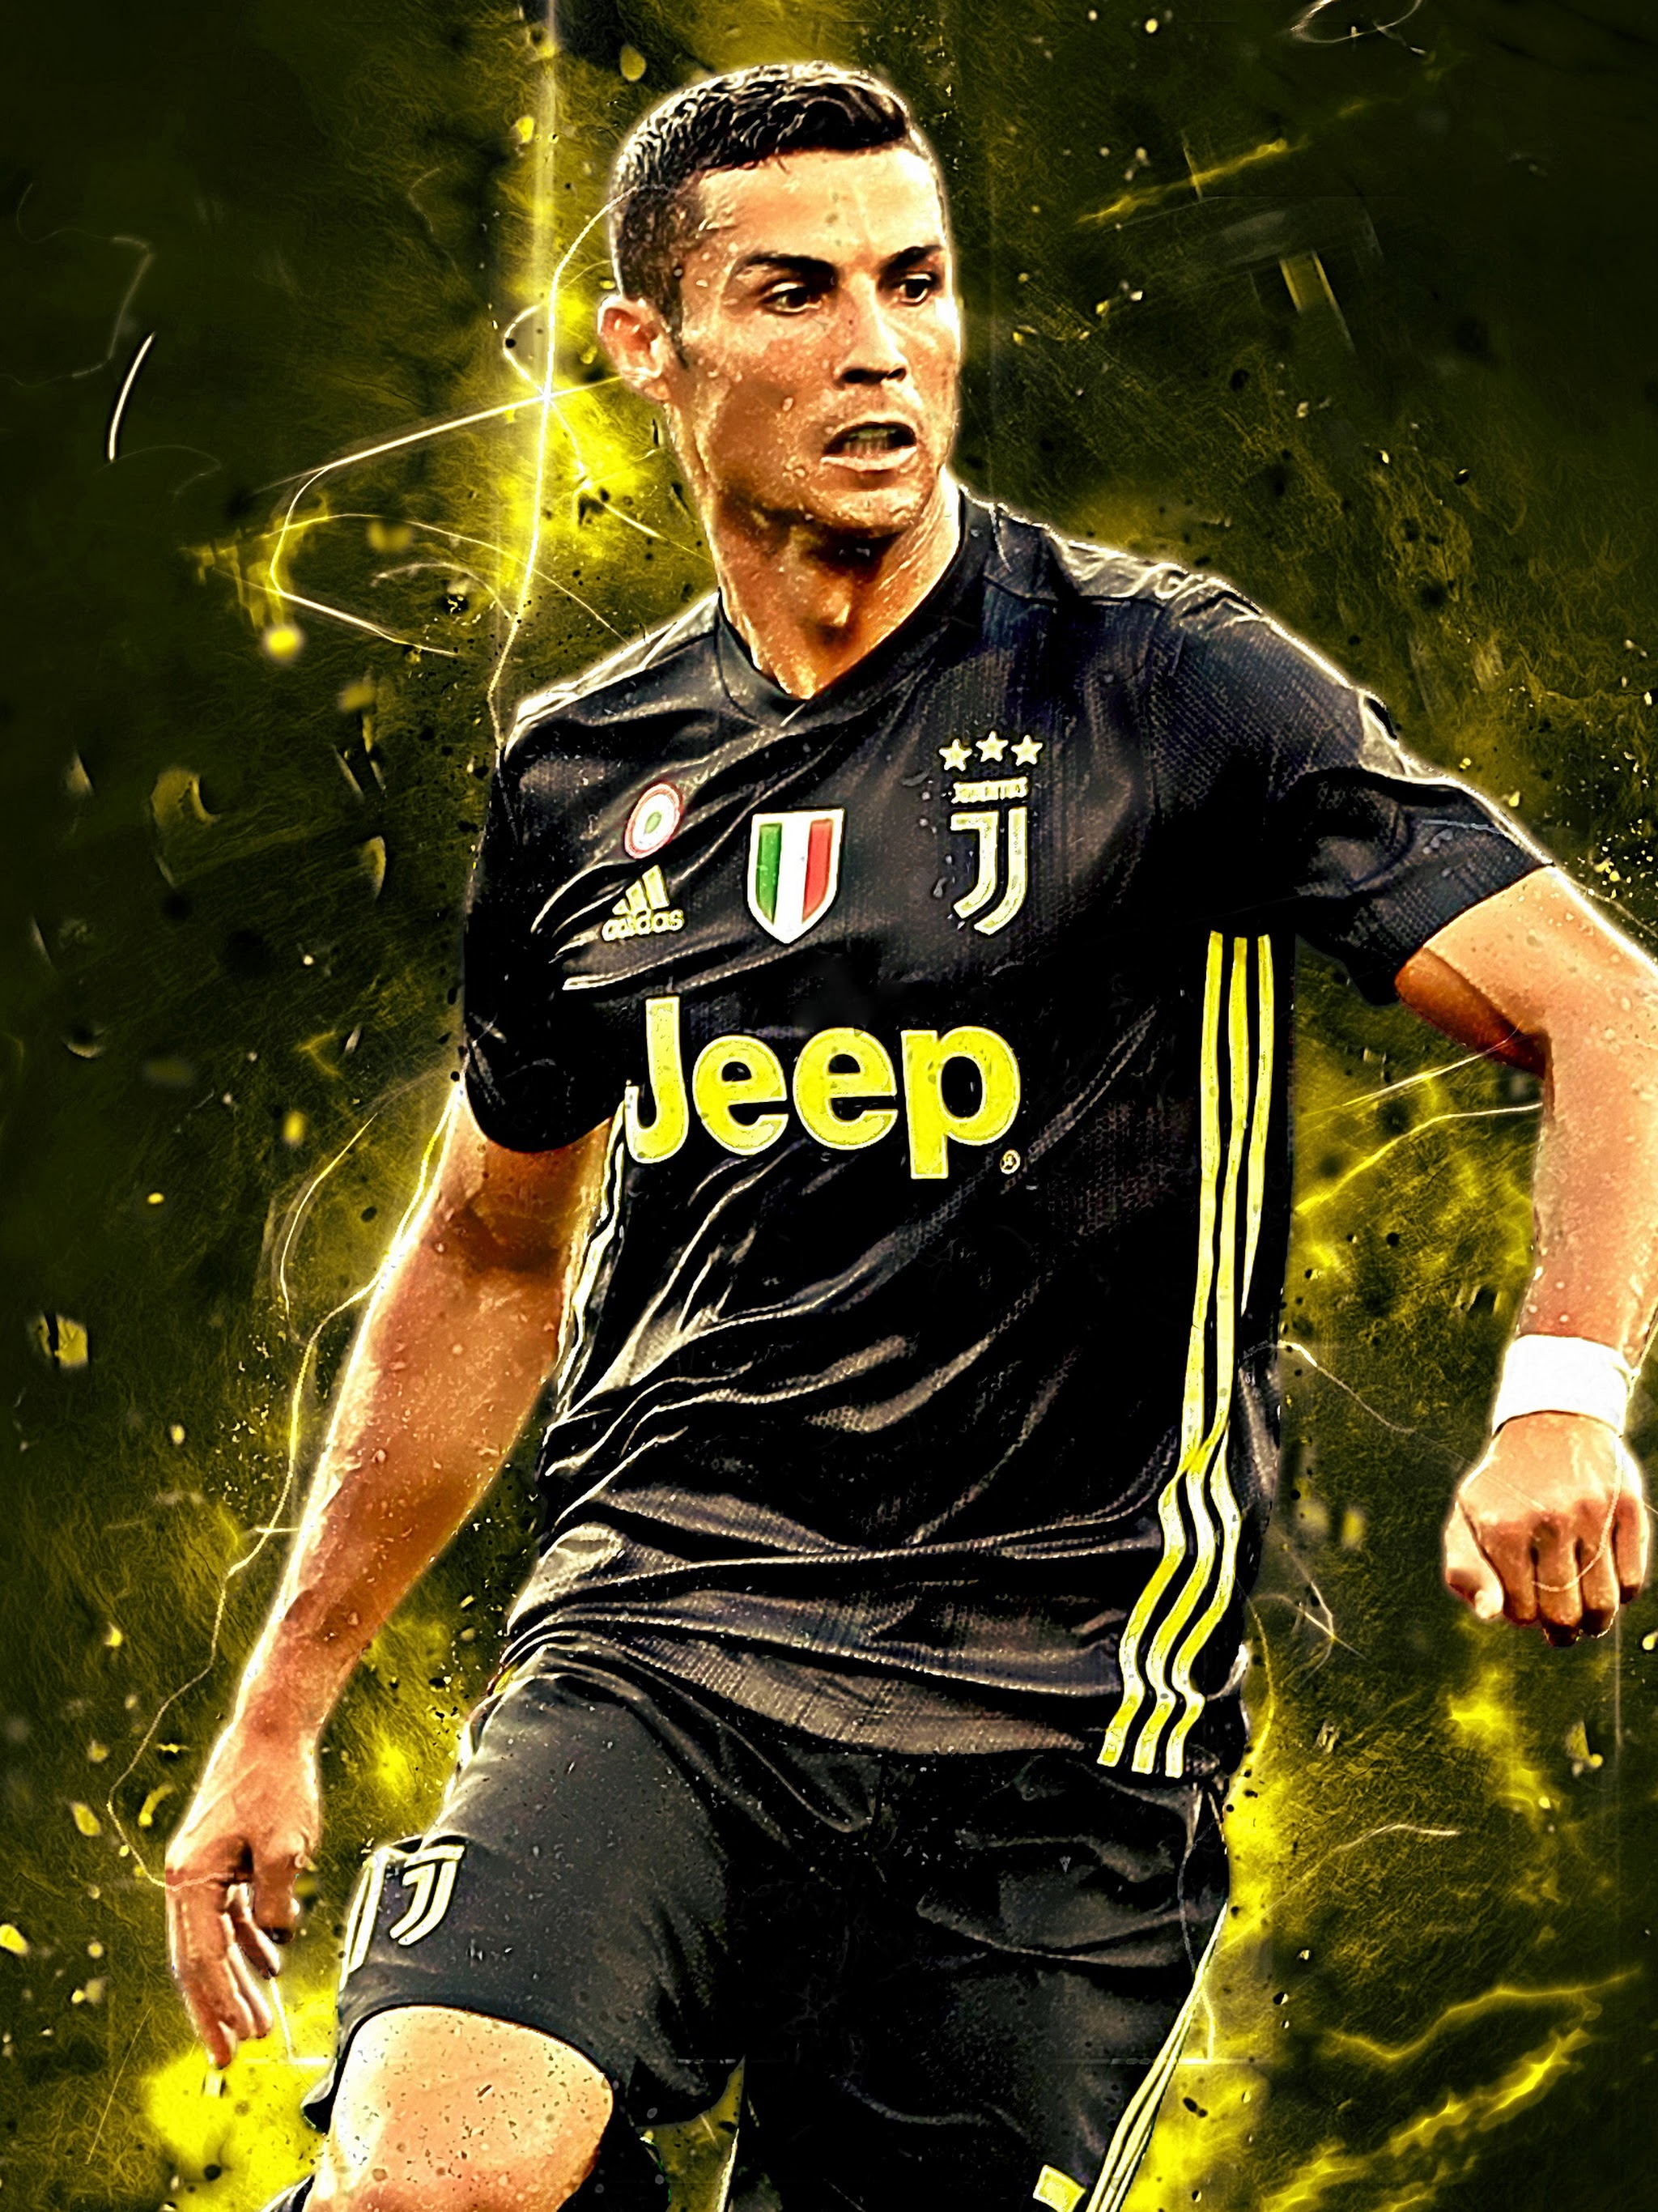 Galaxy Cr7 Wallpapers